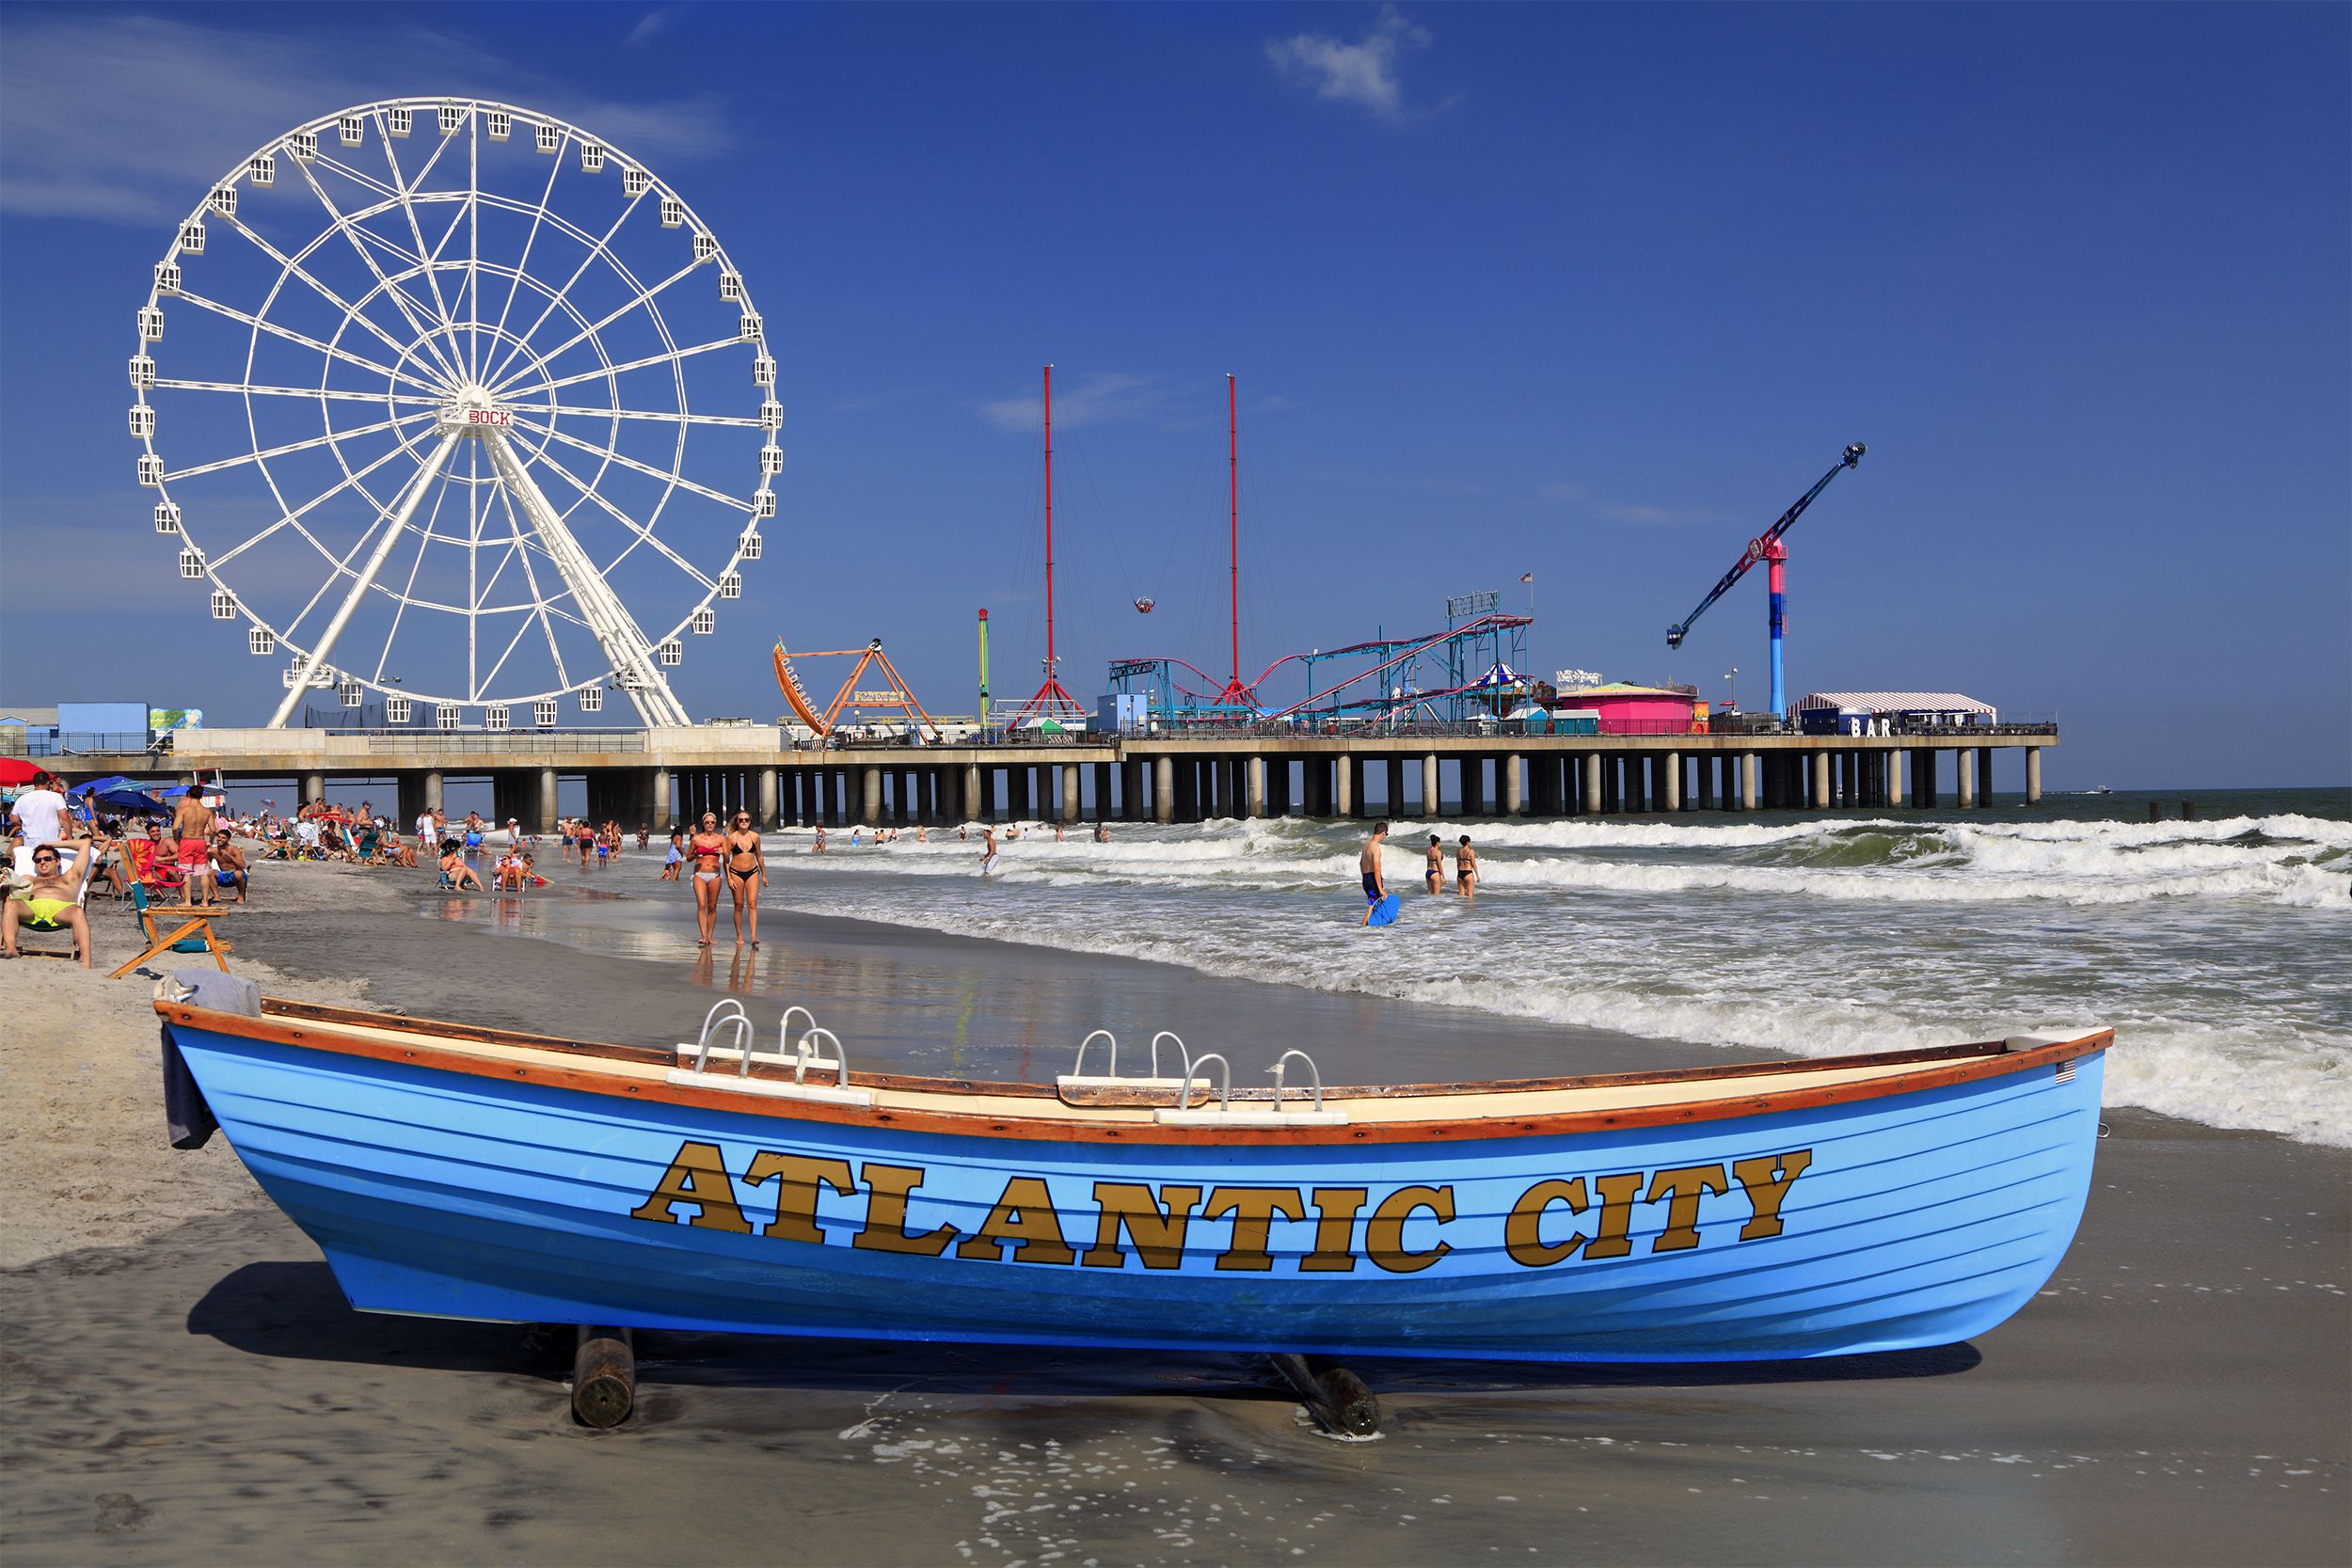 <p>For a classic Garden State selfie, what better place than one of the Jersey Shore's top tourist destinations — Atlantic City? Cheese it up on the boardwalk or head for the bright lights of one of the city's half-dozen casinos. But if you see a seal pup on the beach? Stay at least 150 feet away. No "sealfies" allowed, for the animals' sake.  </p>